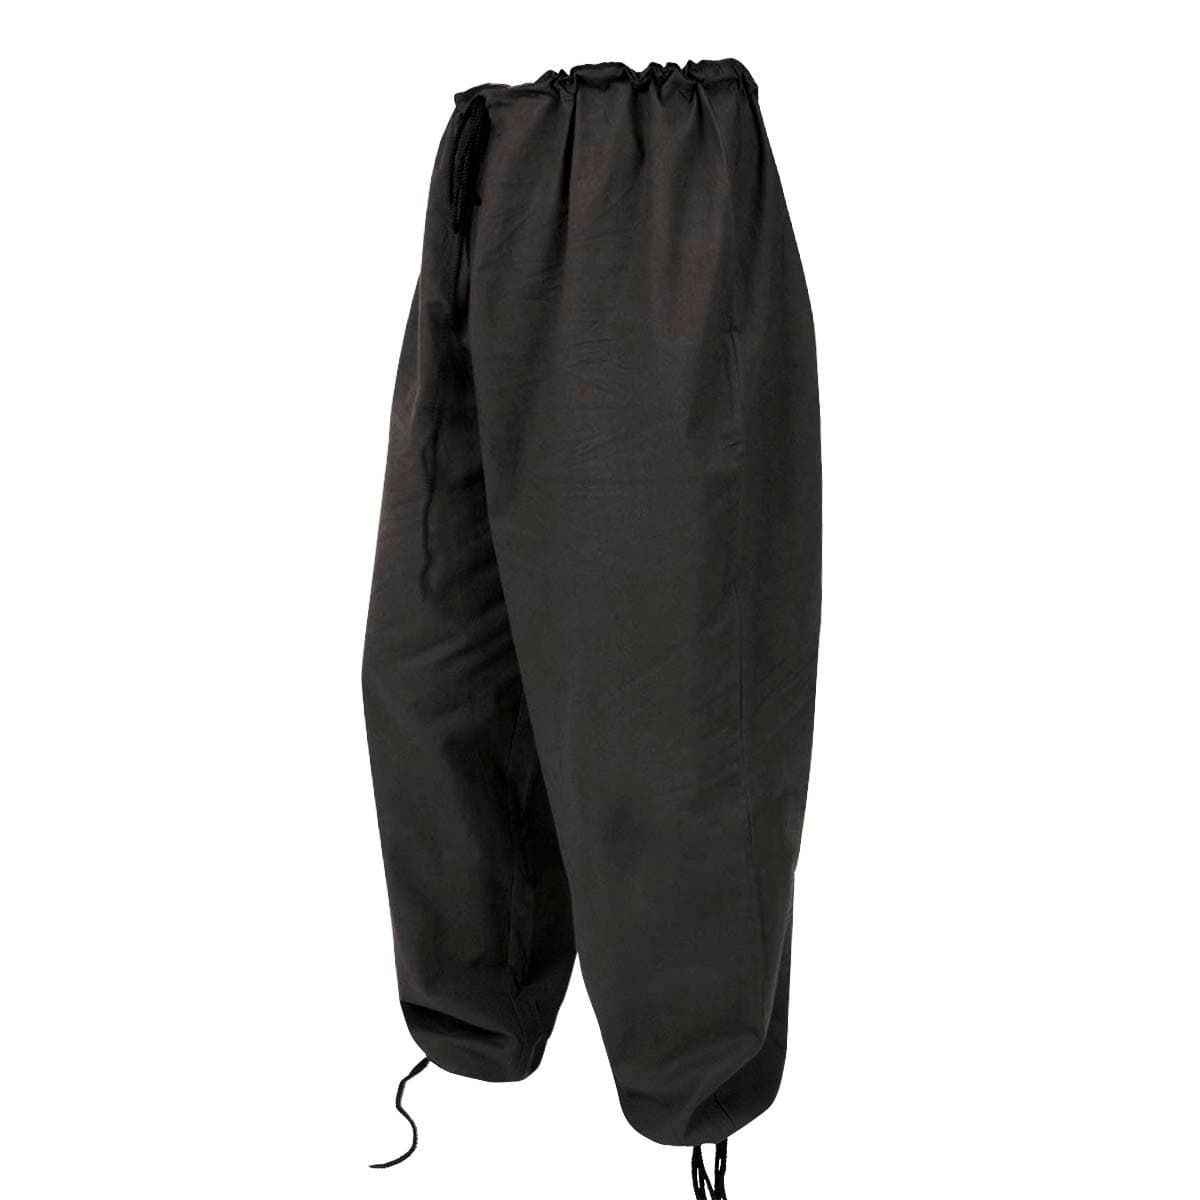 Medieval/LARP/Game Of Thrones fancy dress DRAWSTRING TROUSERS all sizes 